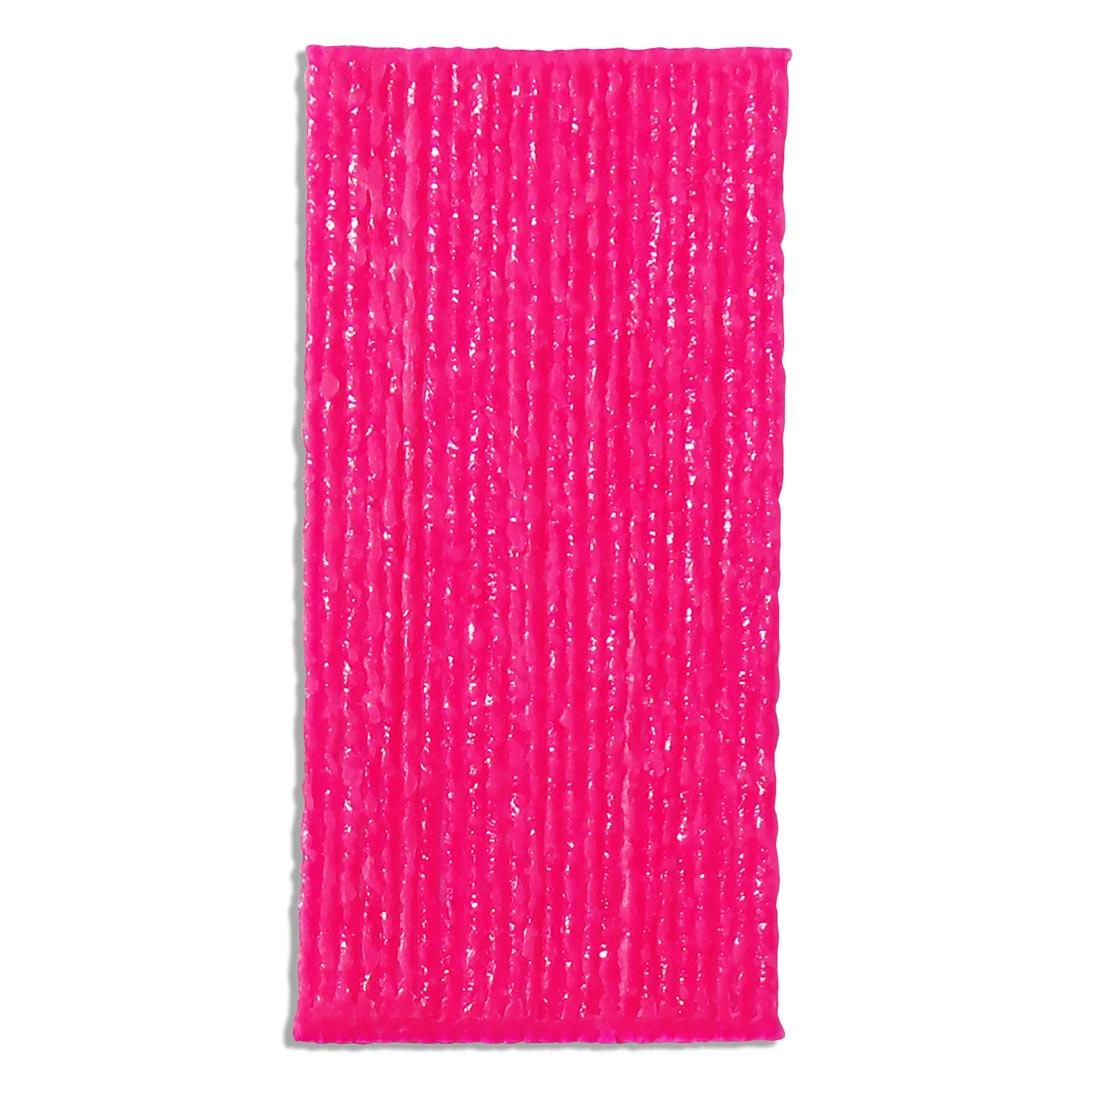 yarn pieces coated with pink wax